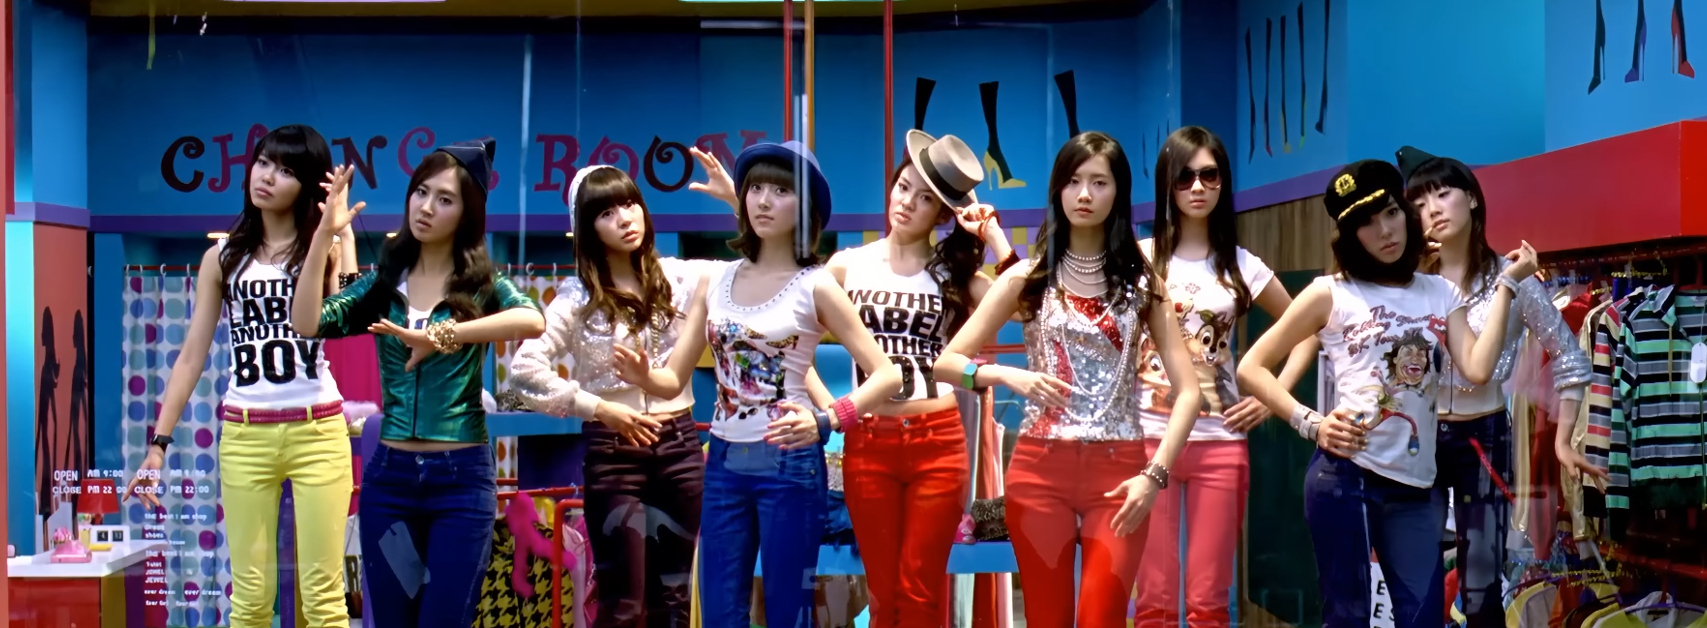 9 members of Girls' Generation are standing on pedestals in a storefront display window posing like mannequins.